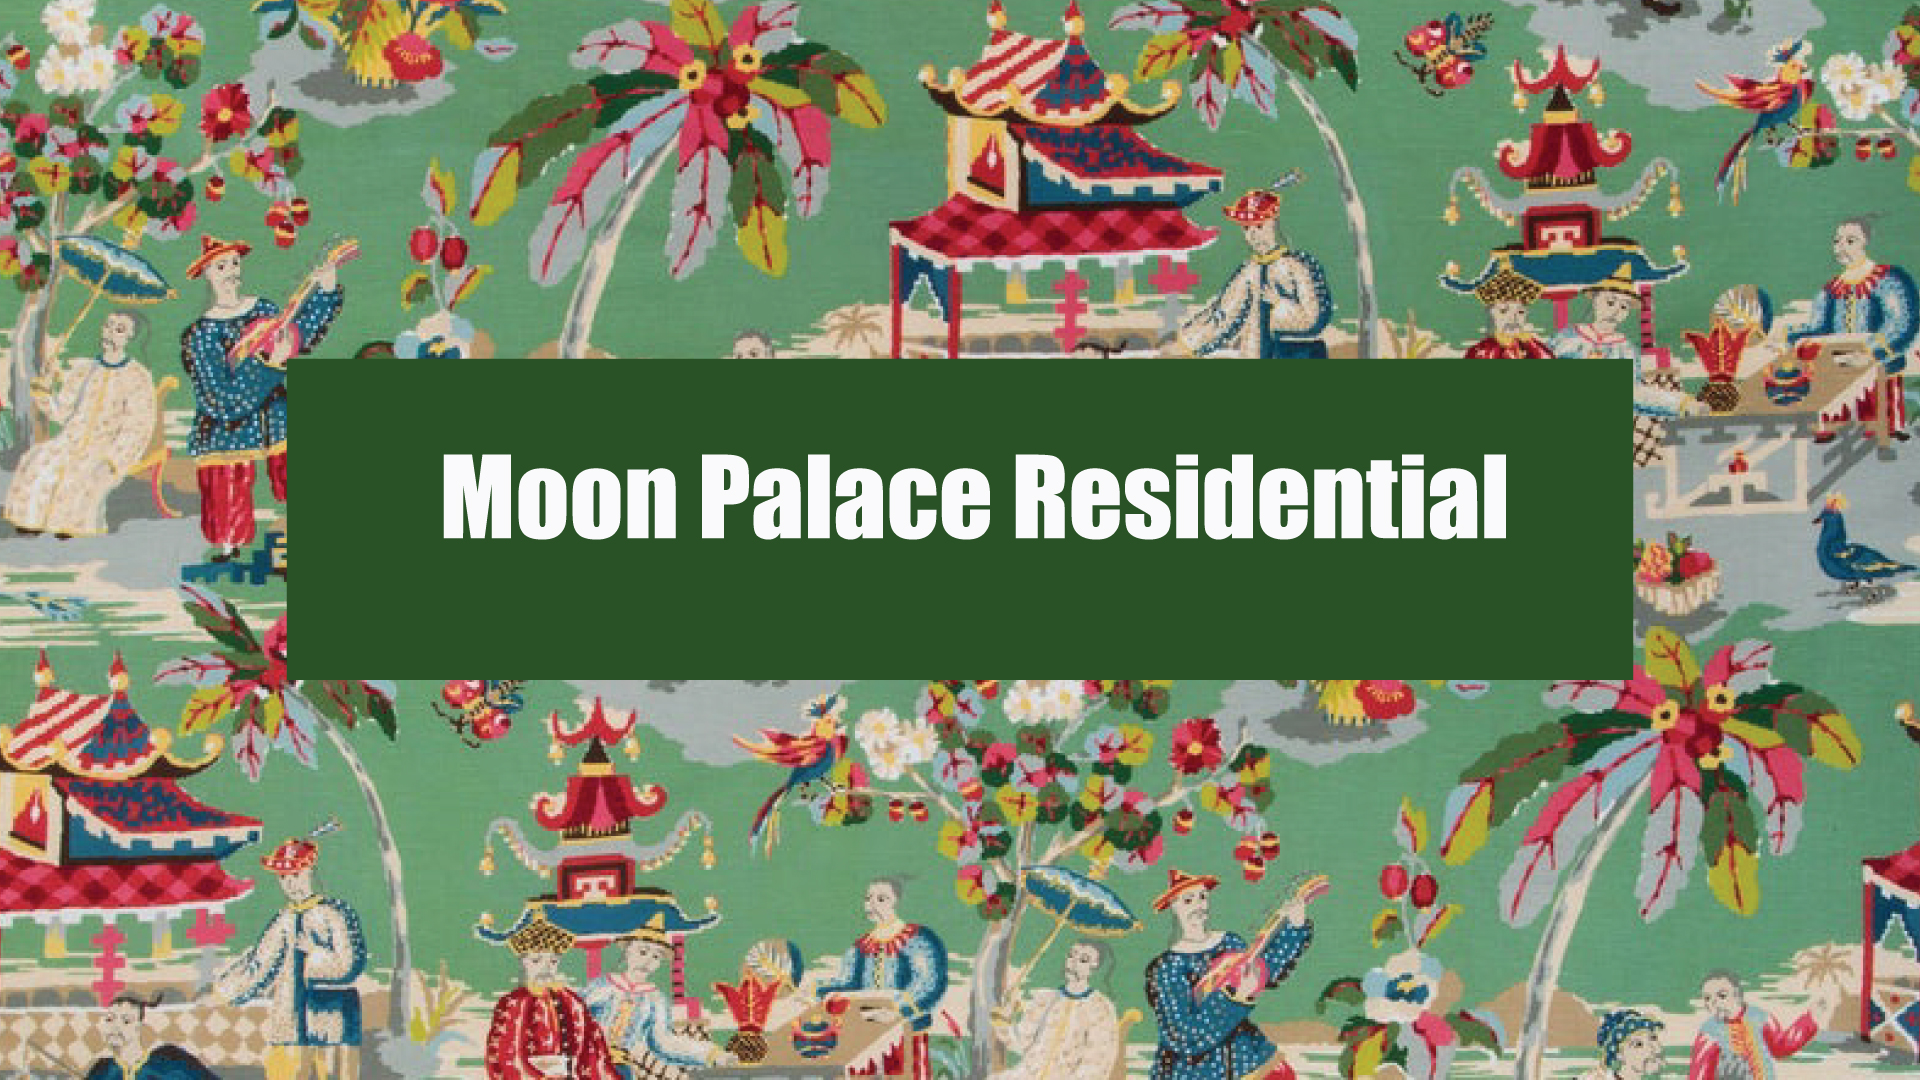 Moon Palace Residential